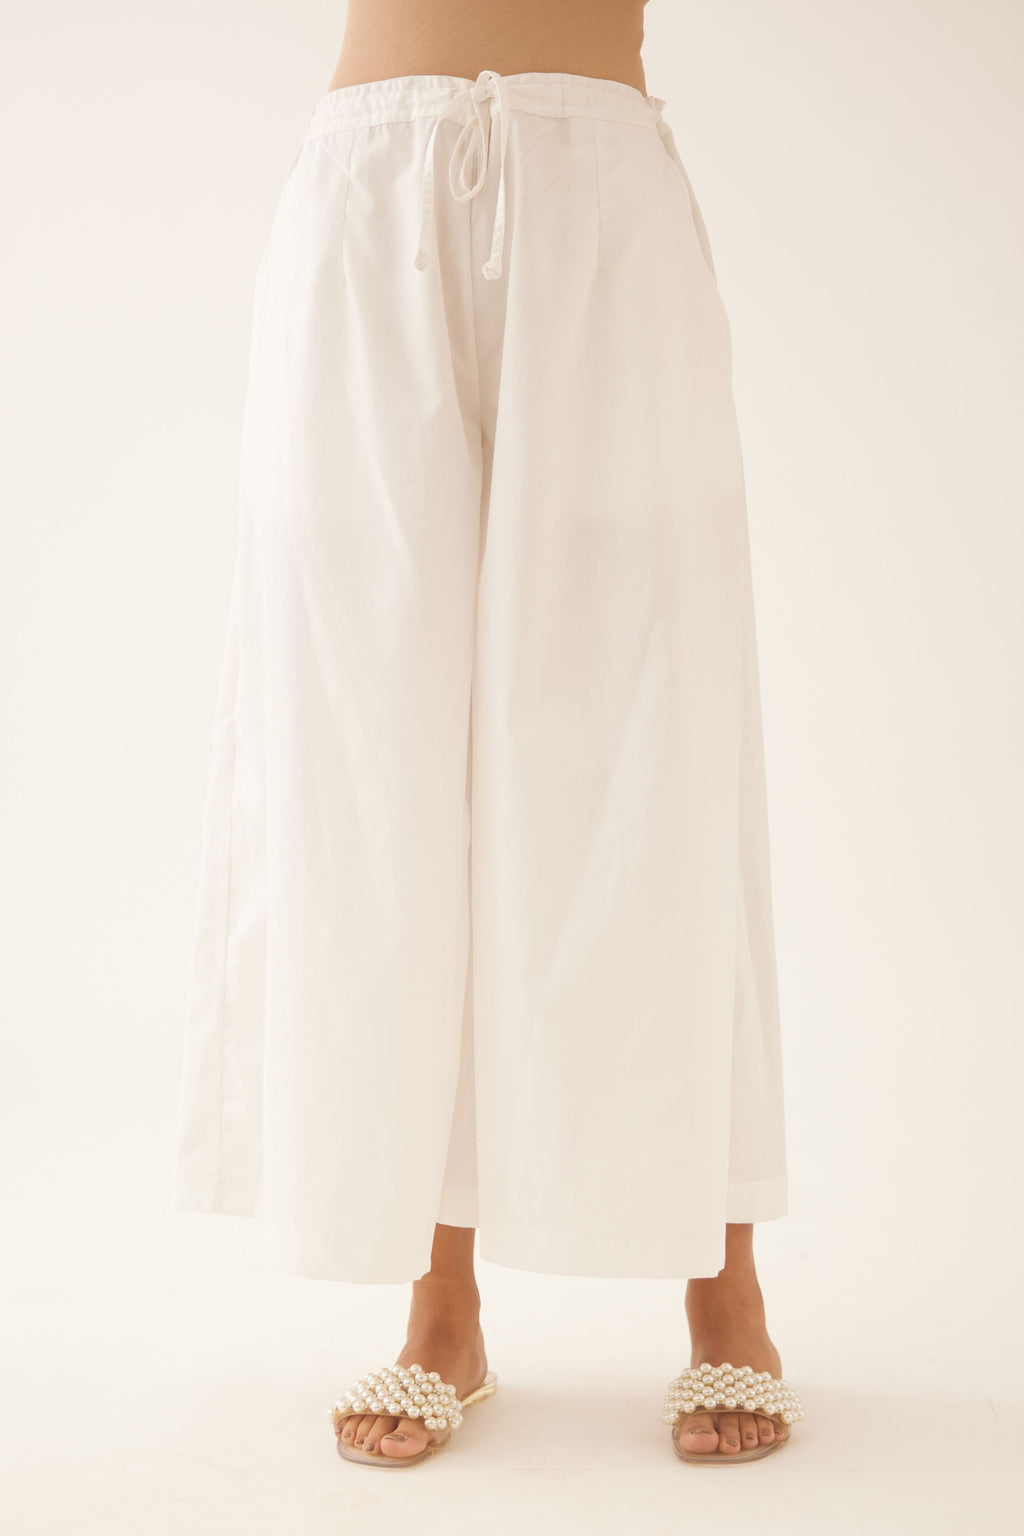 Off white cotton wide leg pants with side pockets.